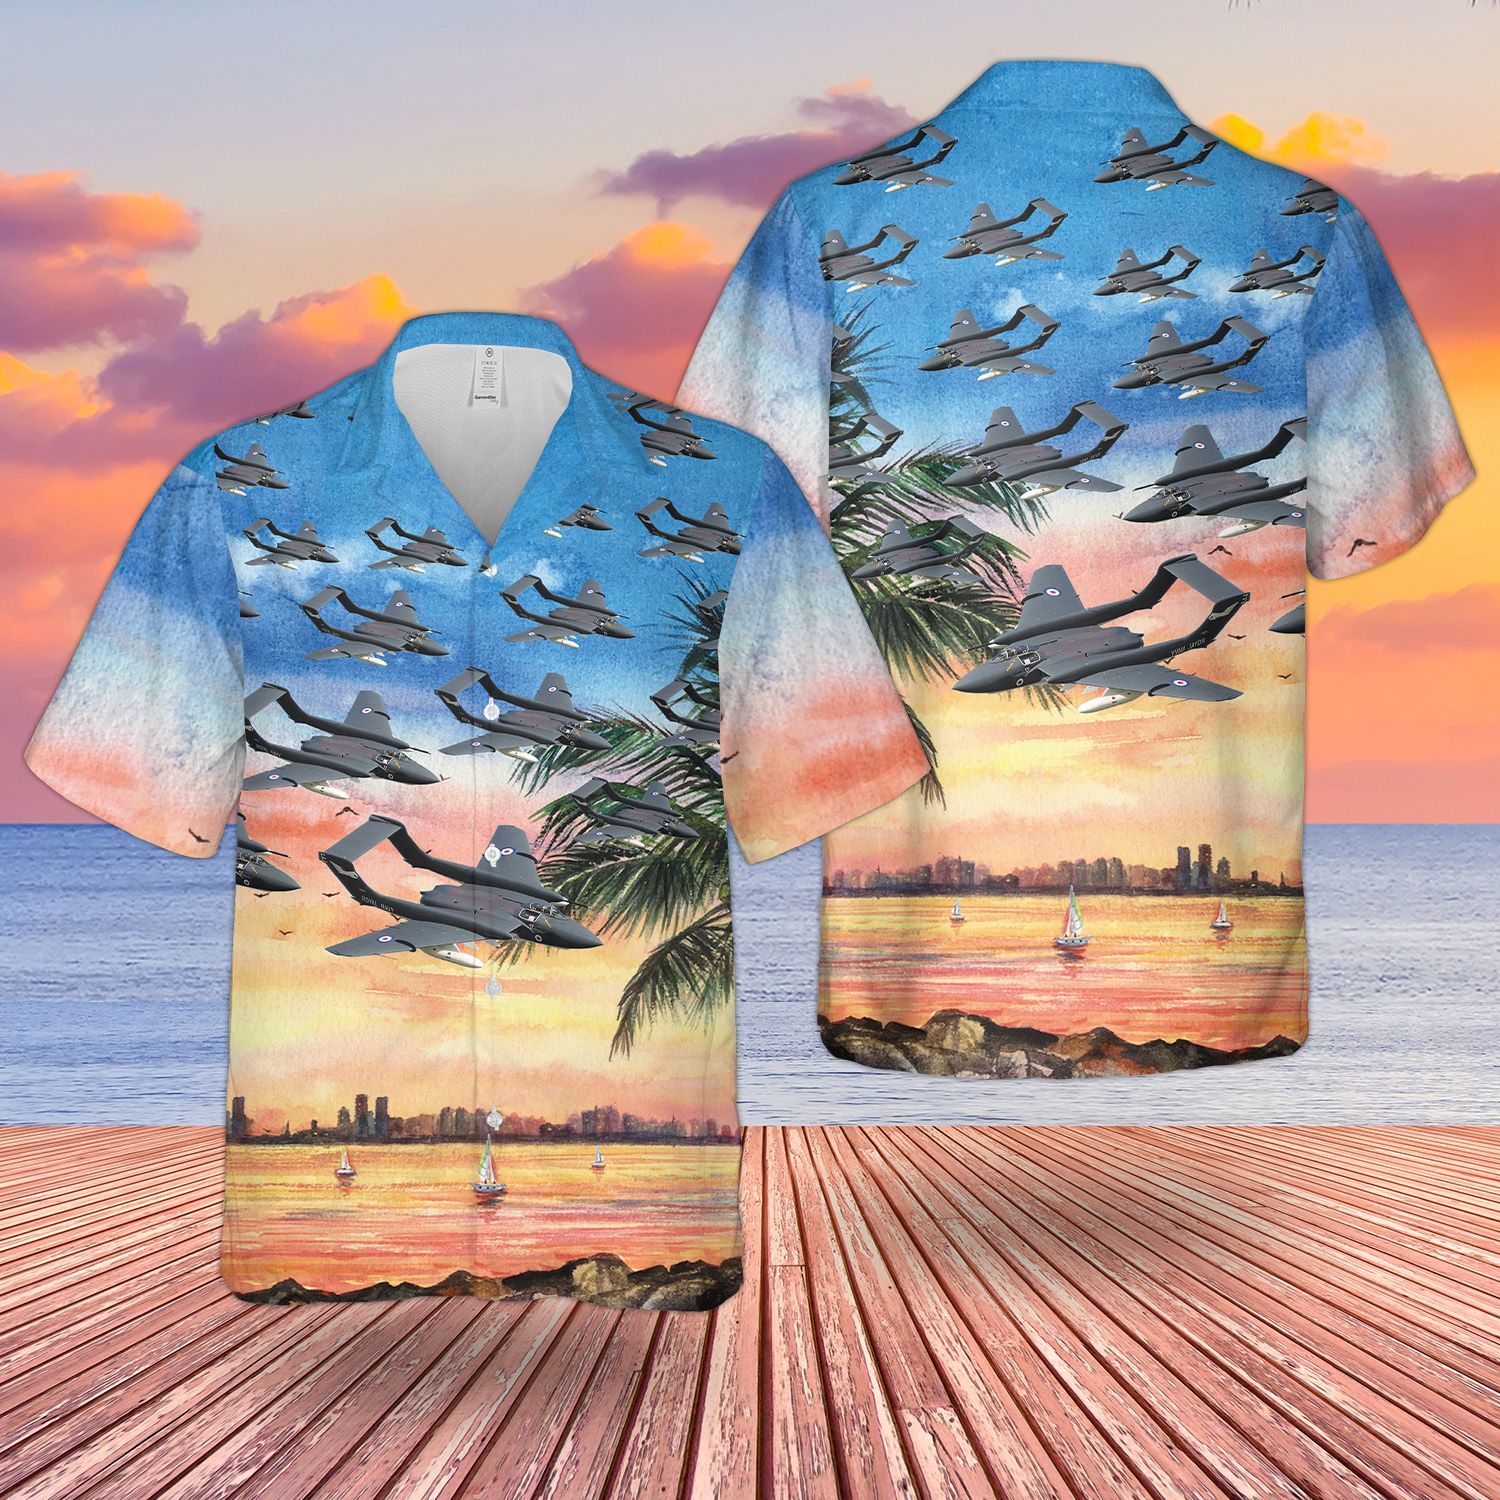 What Are The Best Hawaiian Shirt For Your Needs? Word1